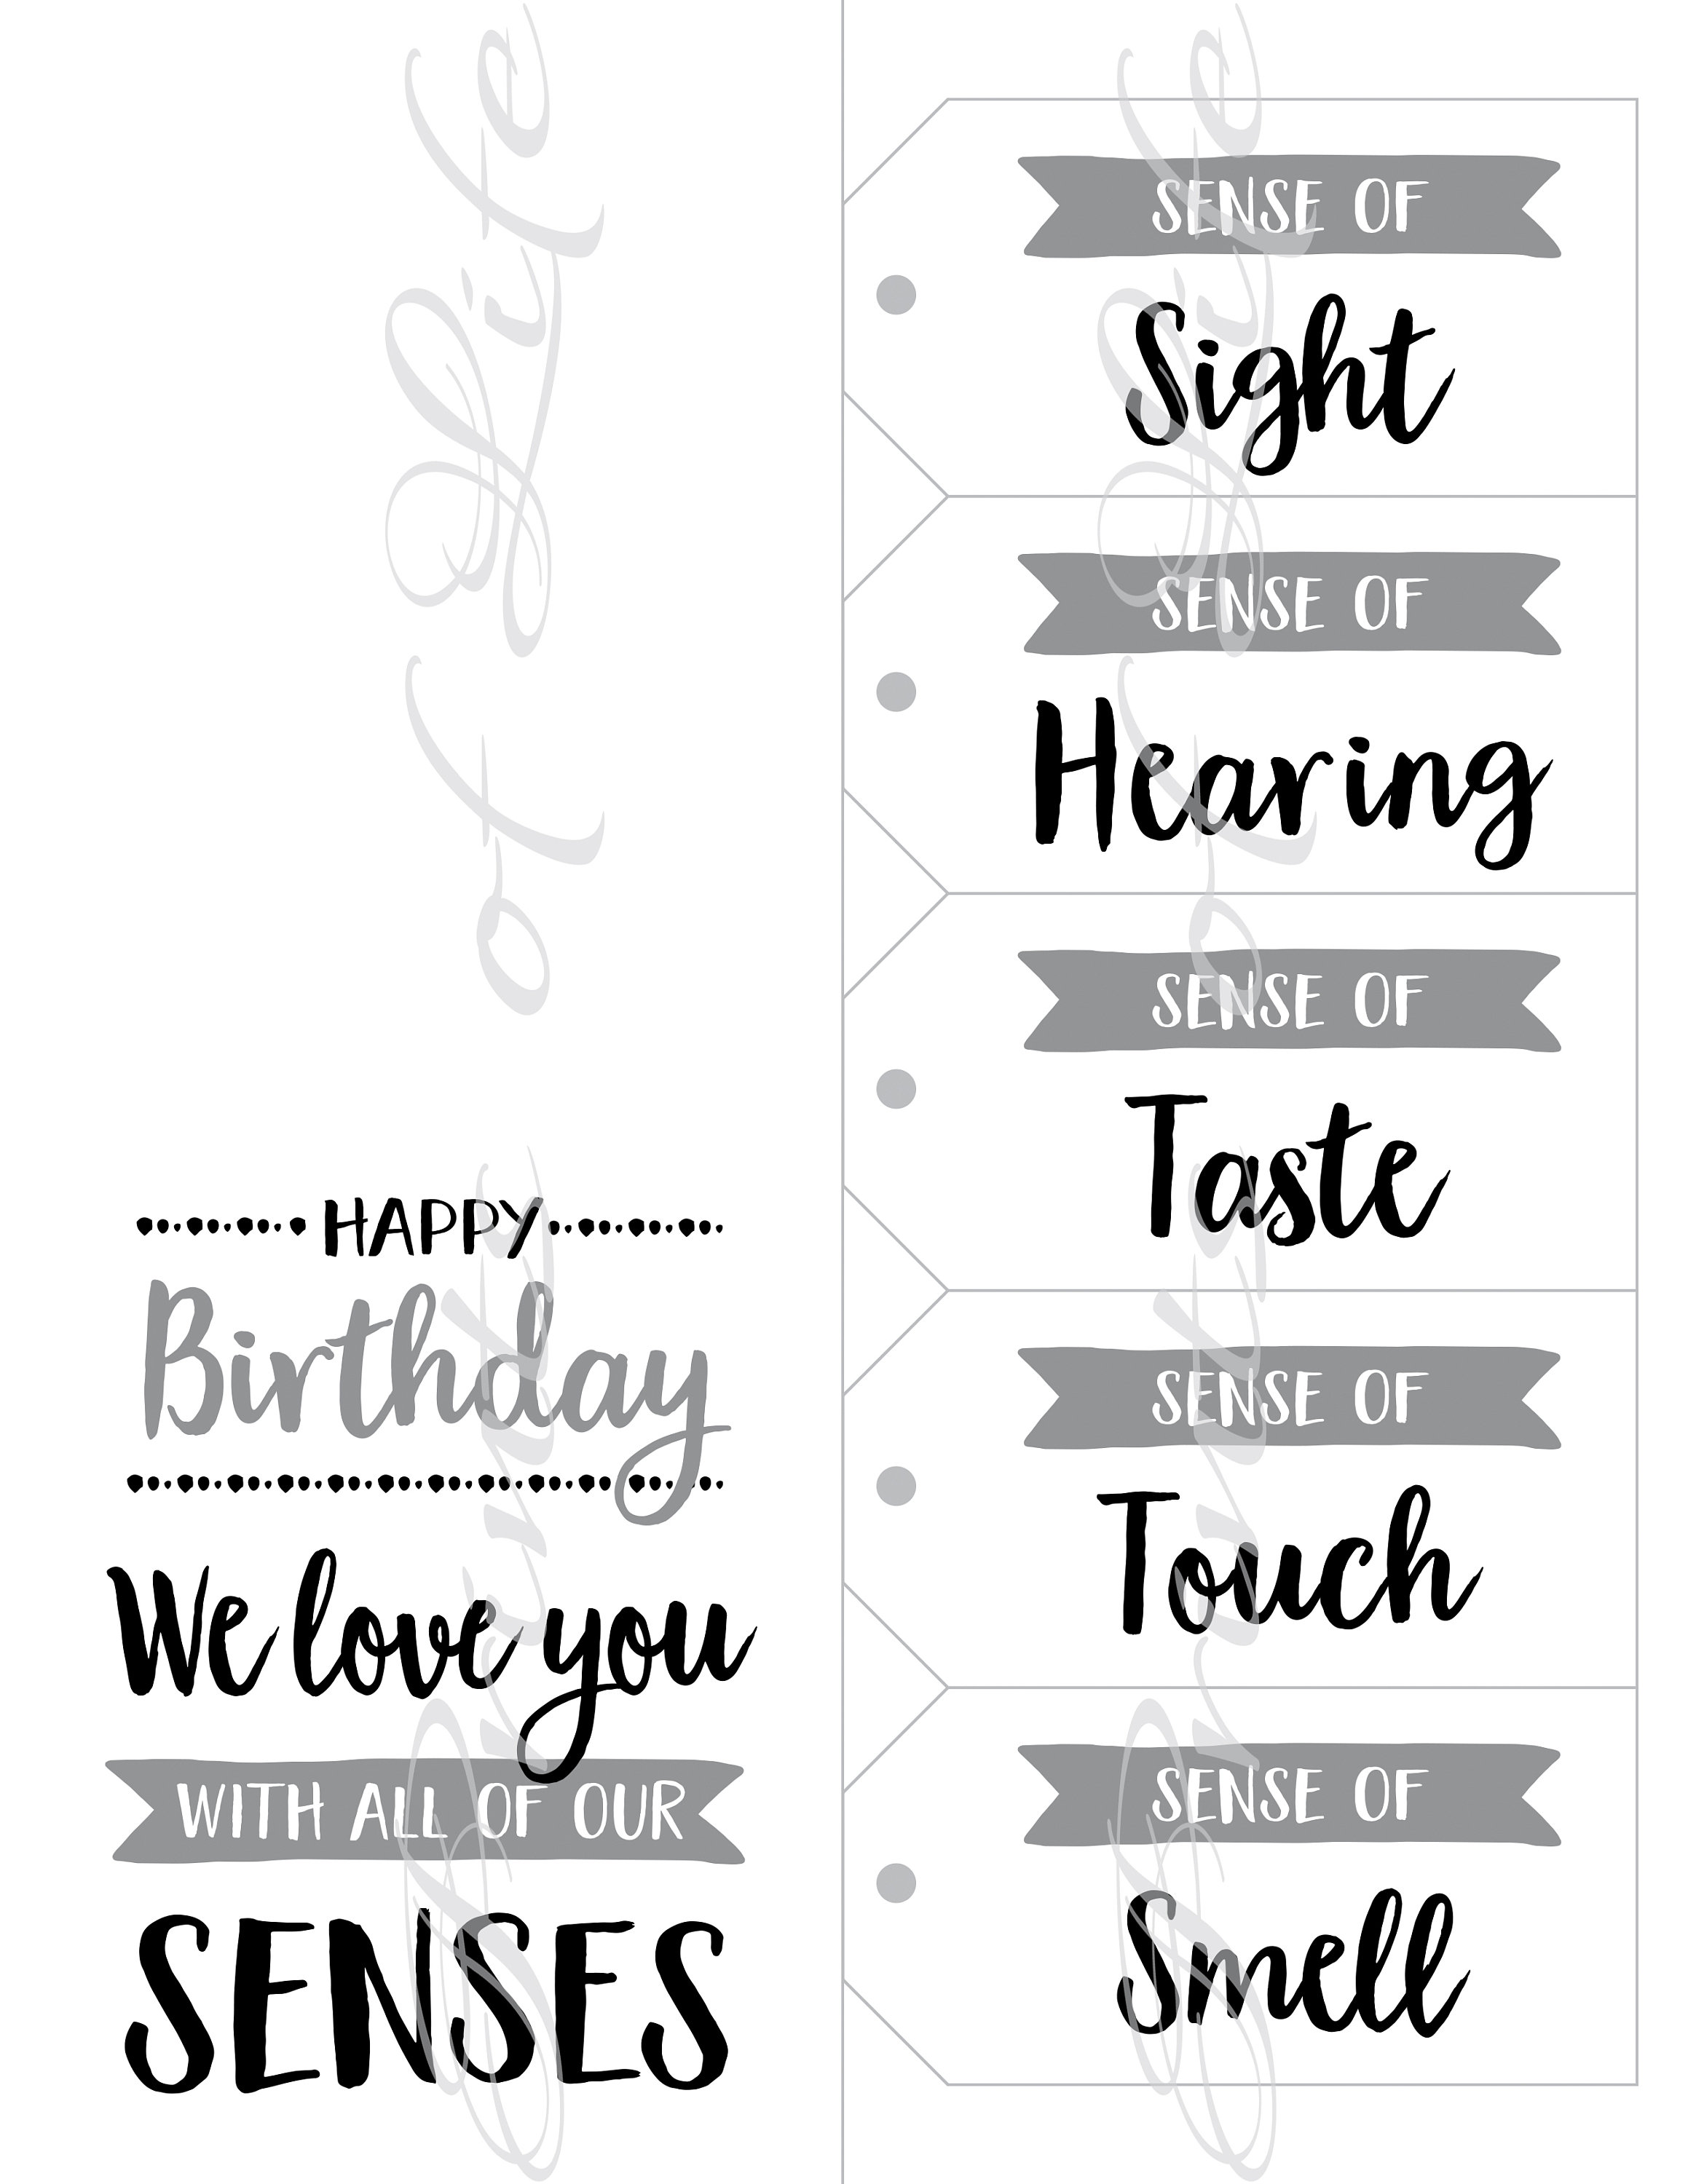 5 Senses Gift Tags & Birthday Card. Instant Download Printable. Five Senses  Gift for Child Kid Parent Friend Relative Son Daughter Children. 